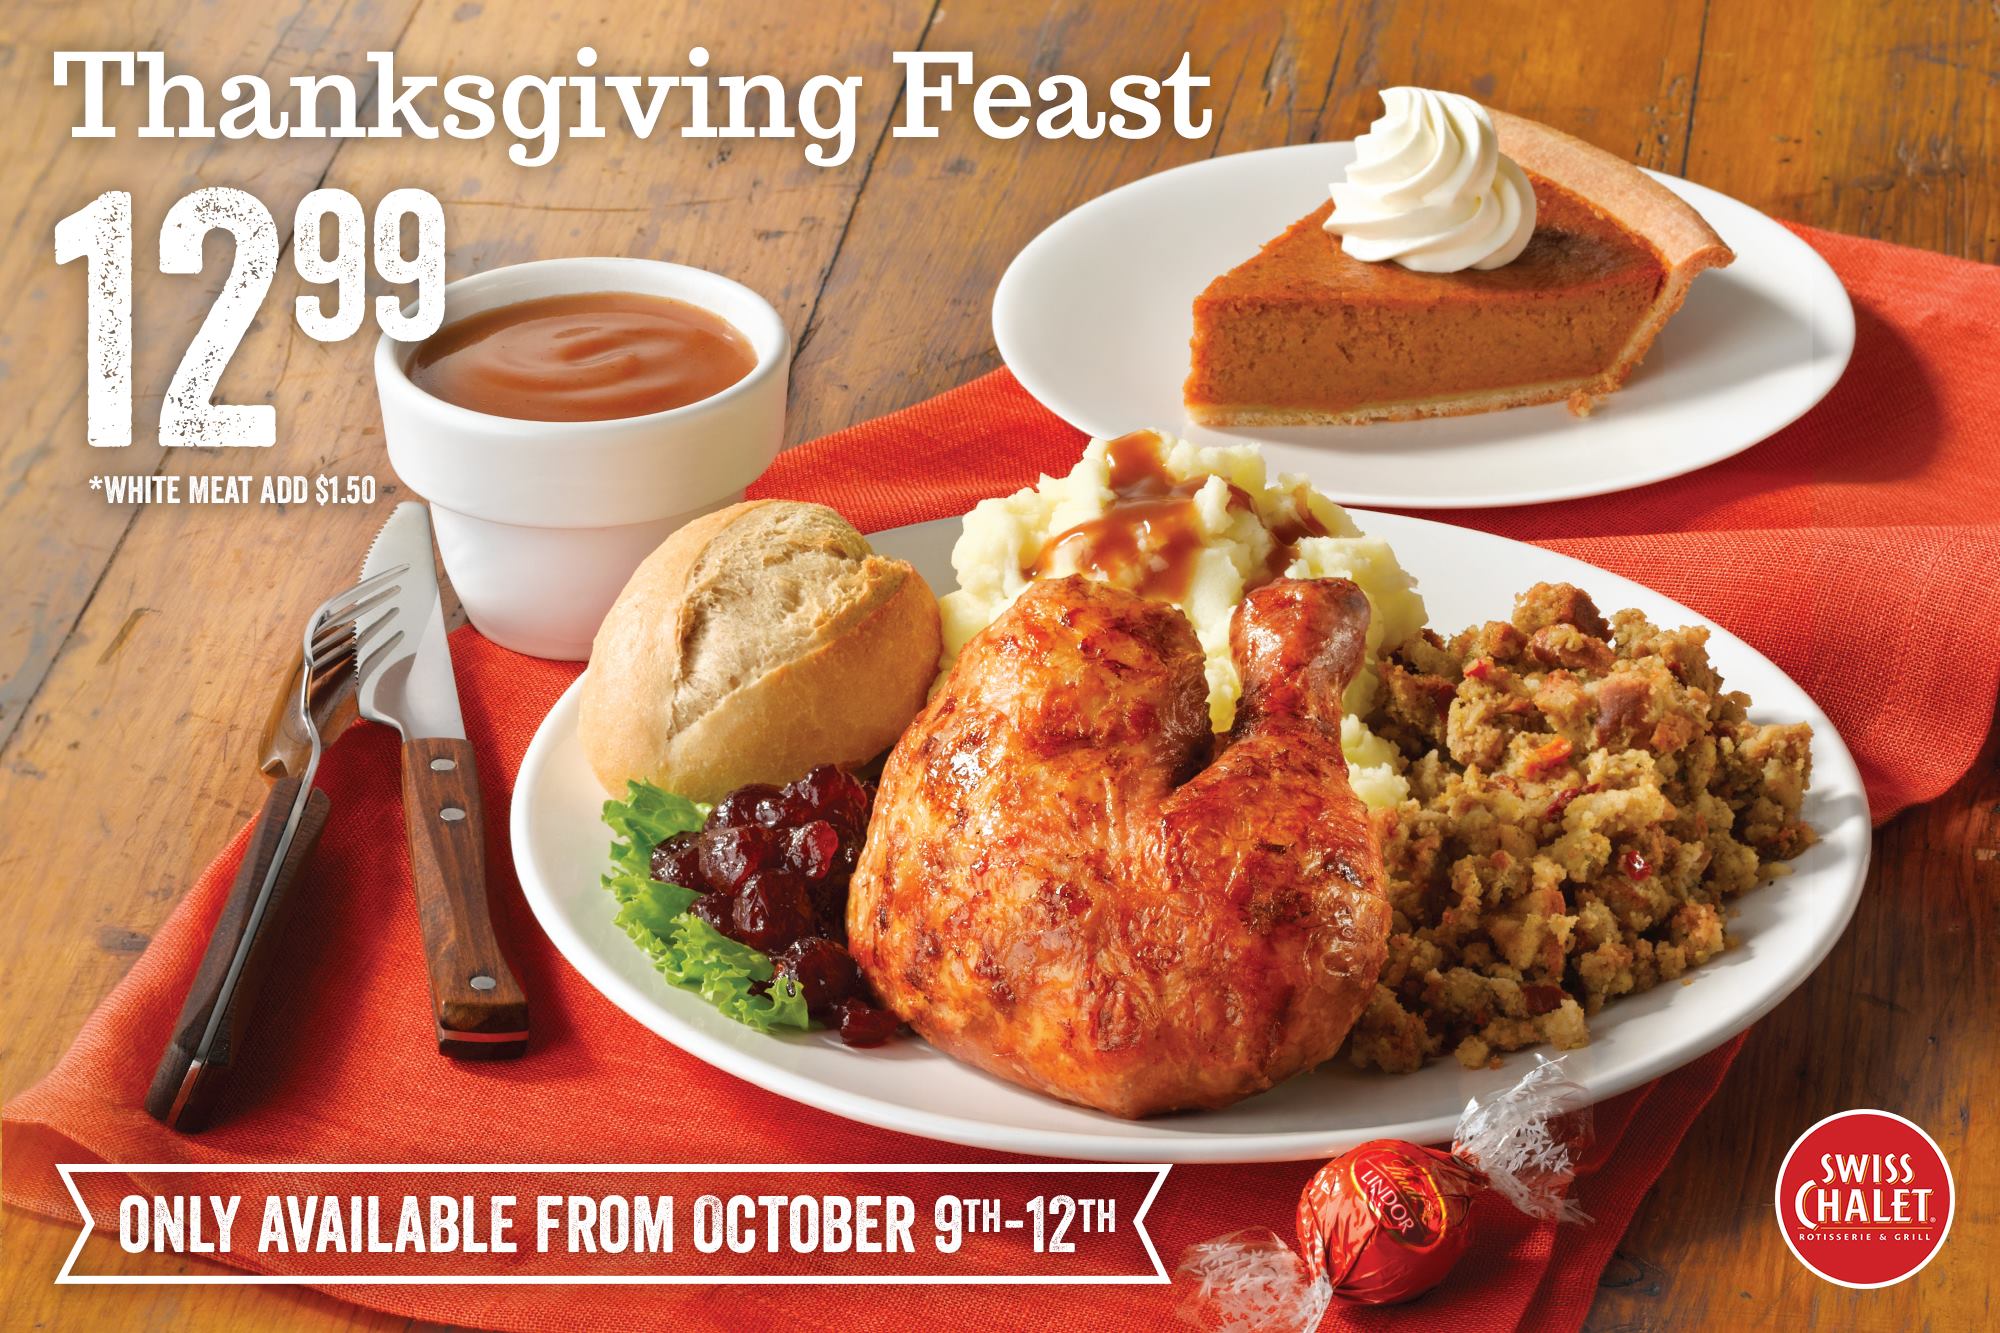 Swiss Chalet Canada Thanksgiving Feast Offer 12.99 for Thanksgiving